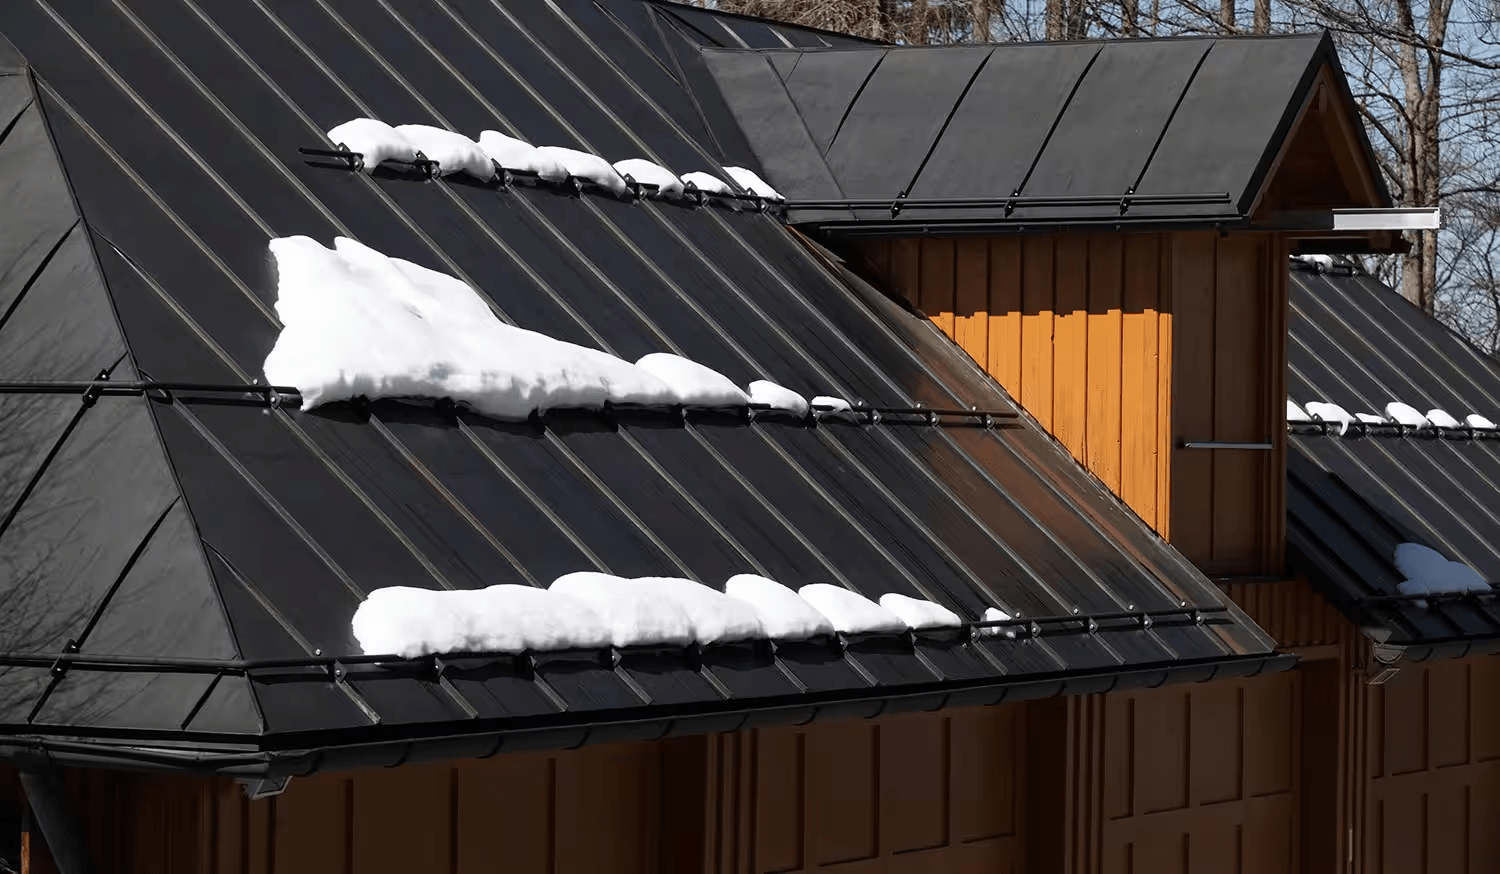 Metal Roof Vs Shingles In Cold Climate: Which Is Better for Your Home?